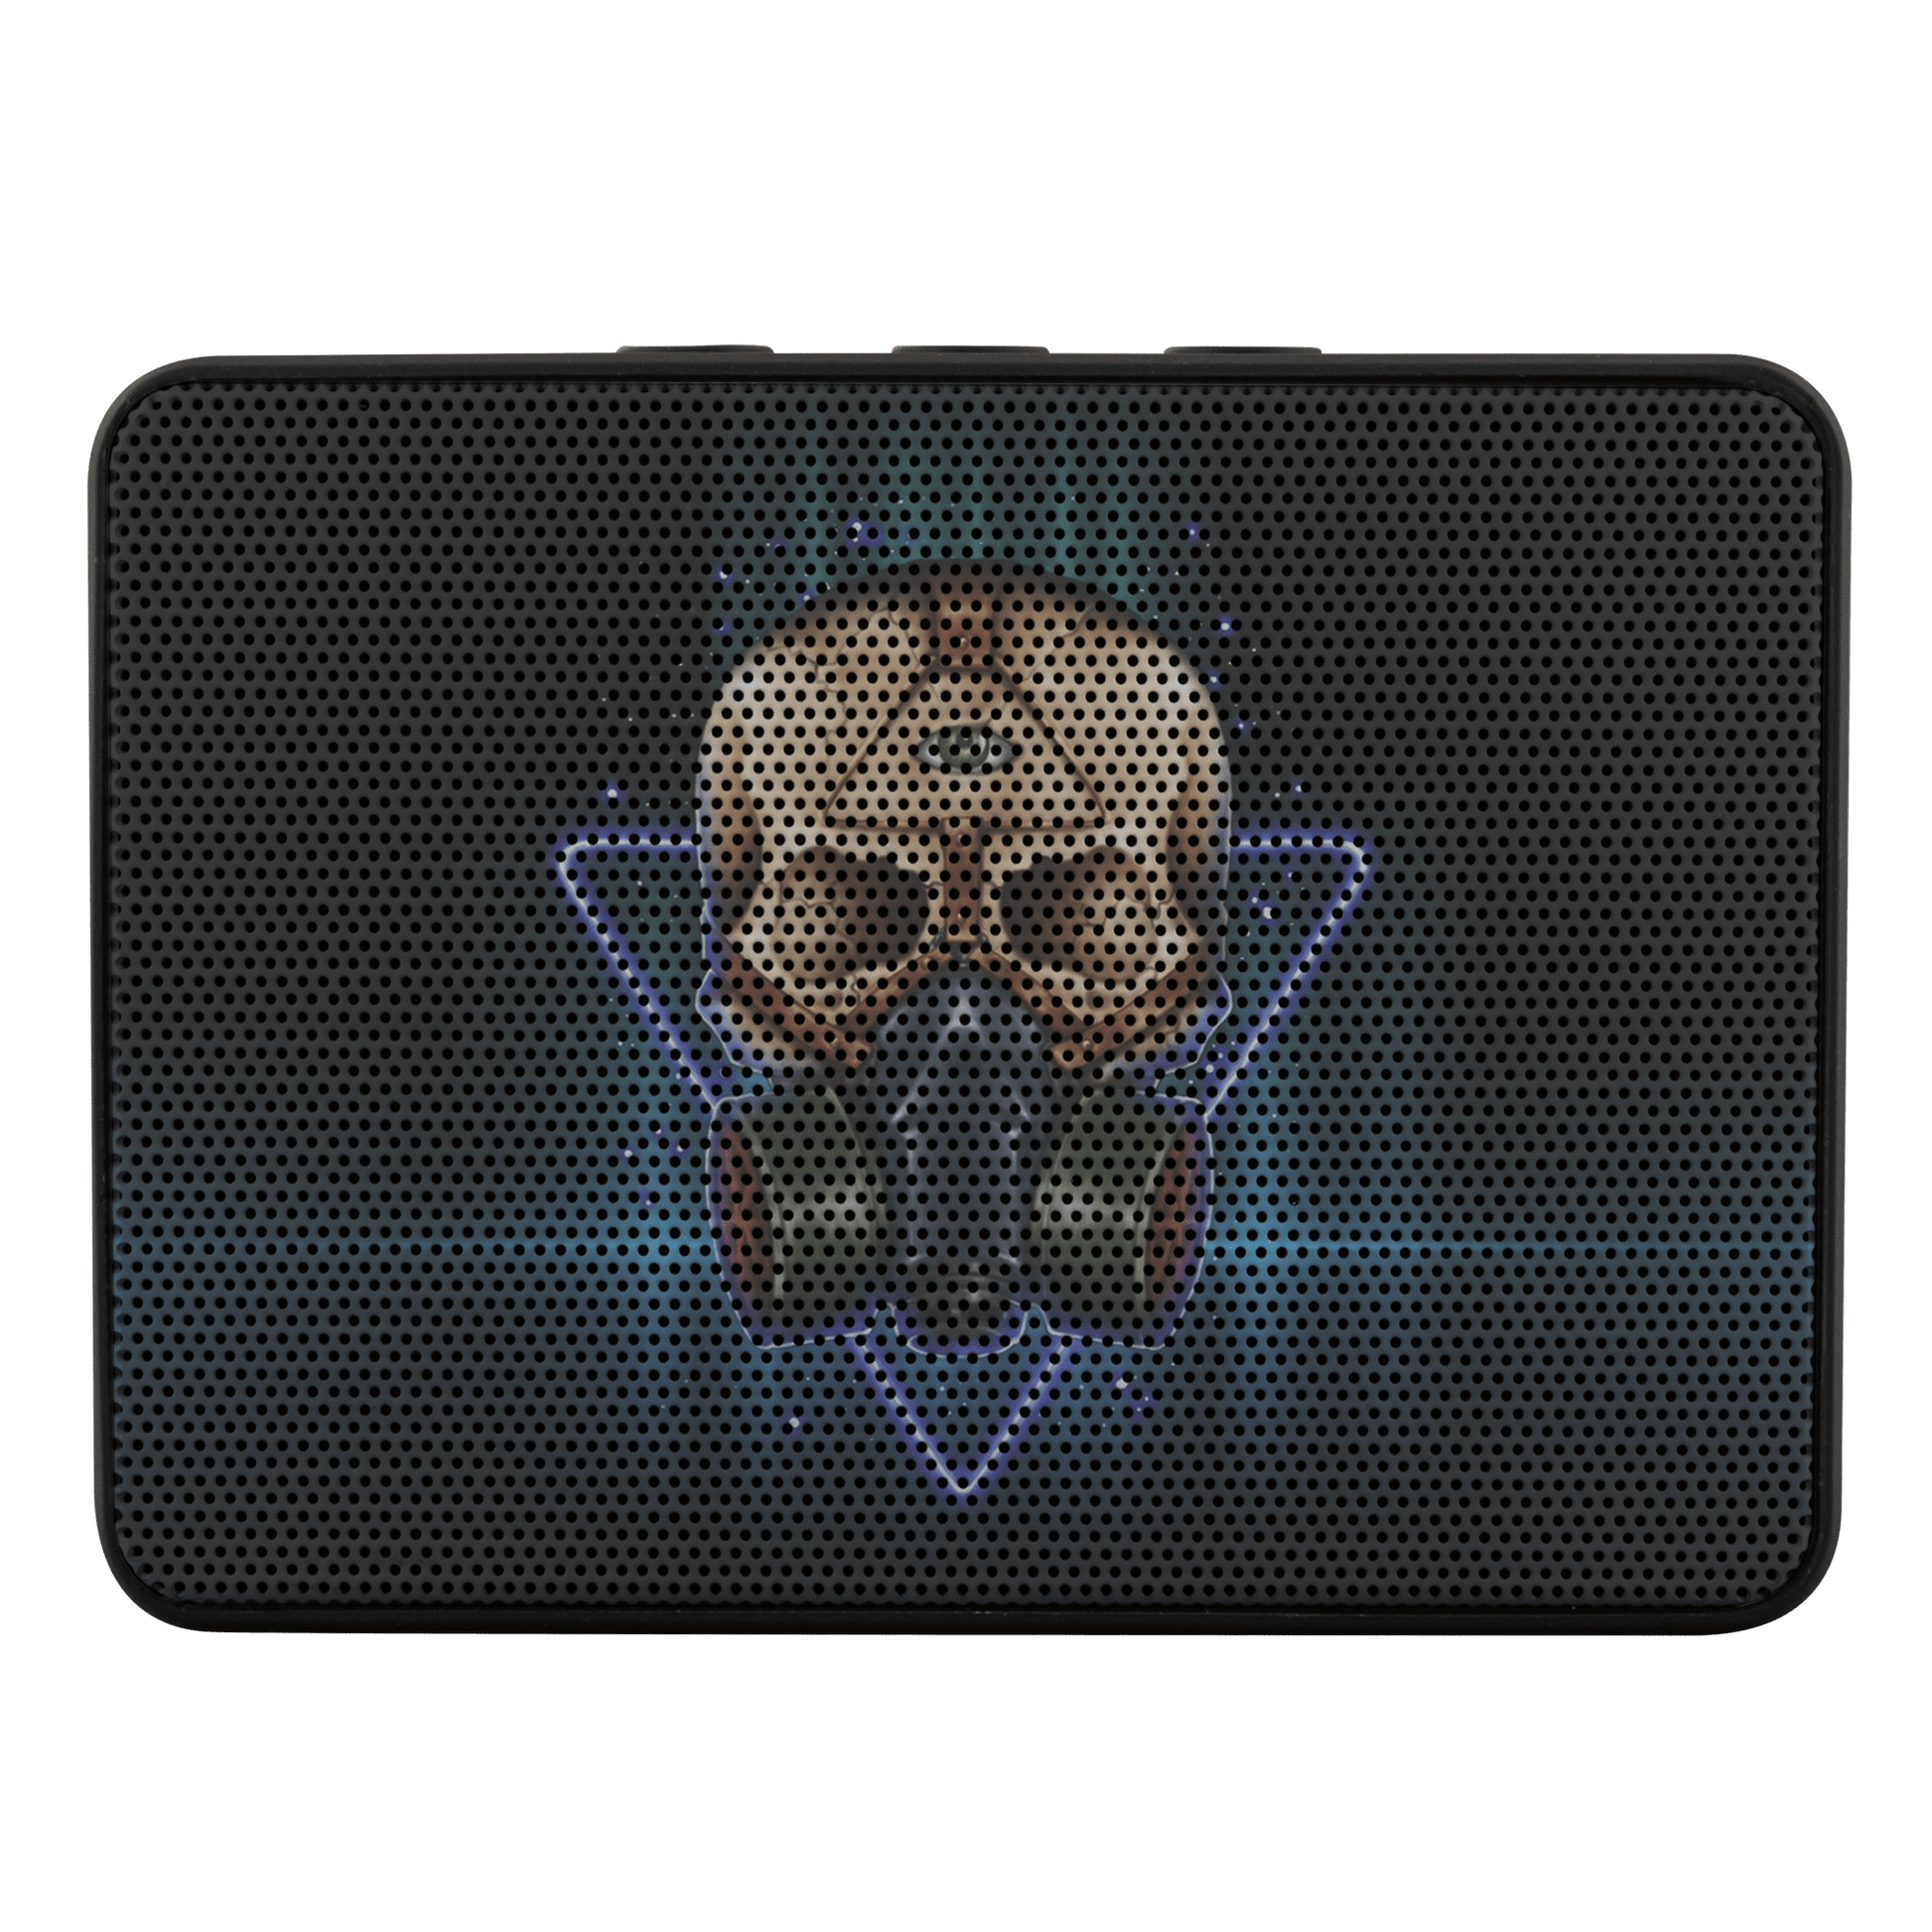 Boxanne Portable Bluetooth Speaker With Toxic Skull Design - Omtheo Gifts